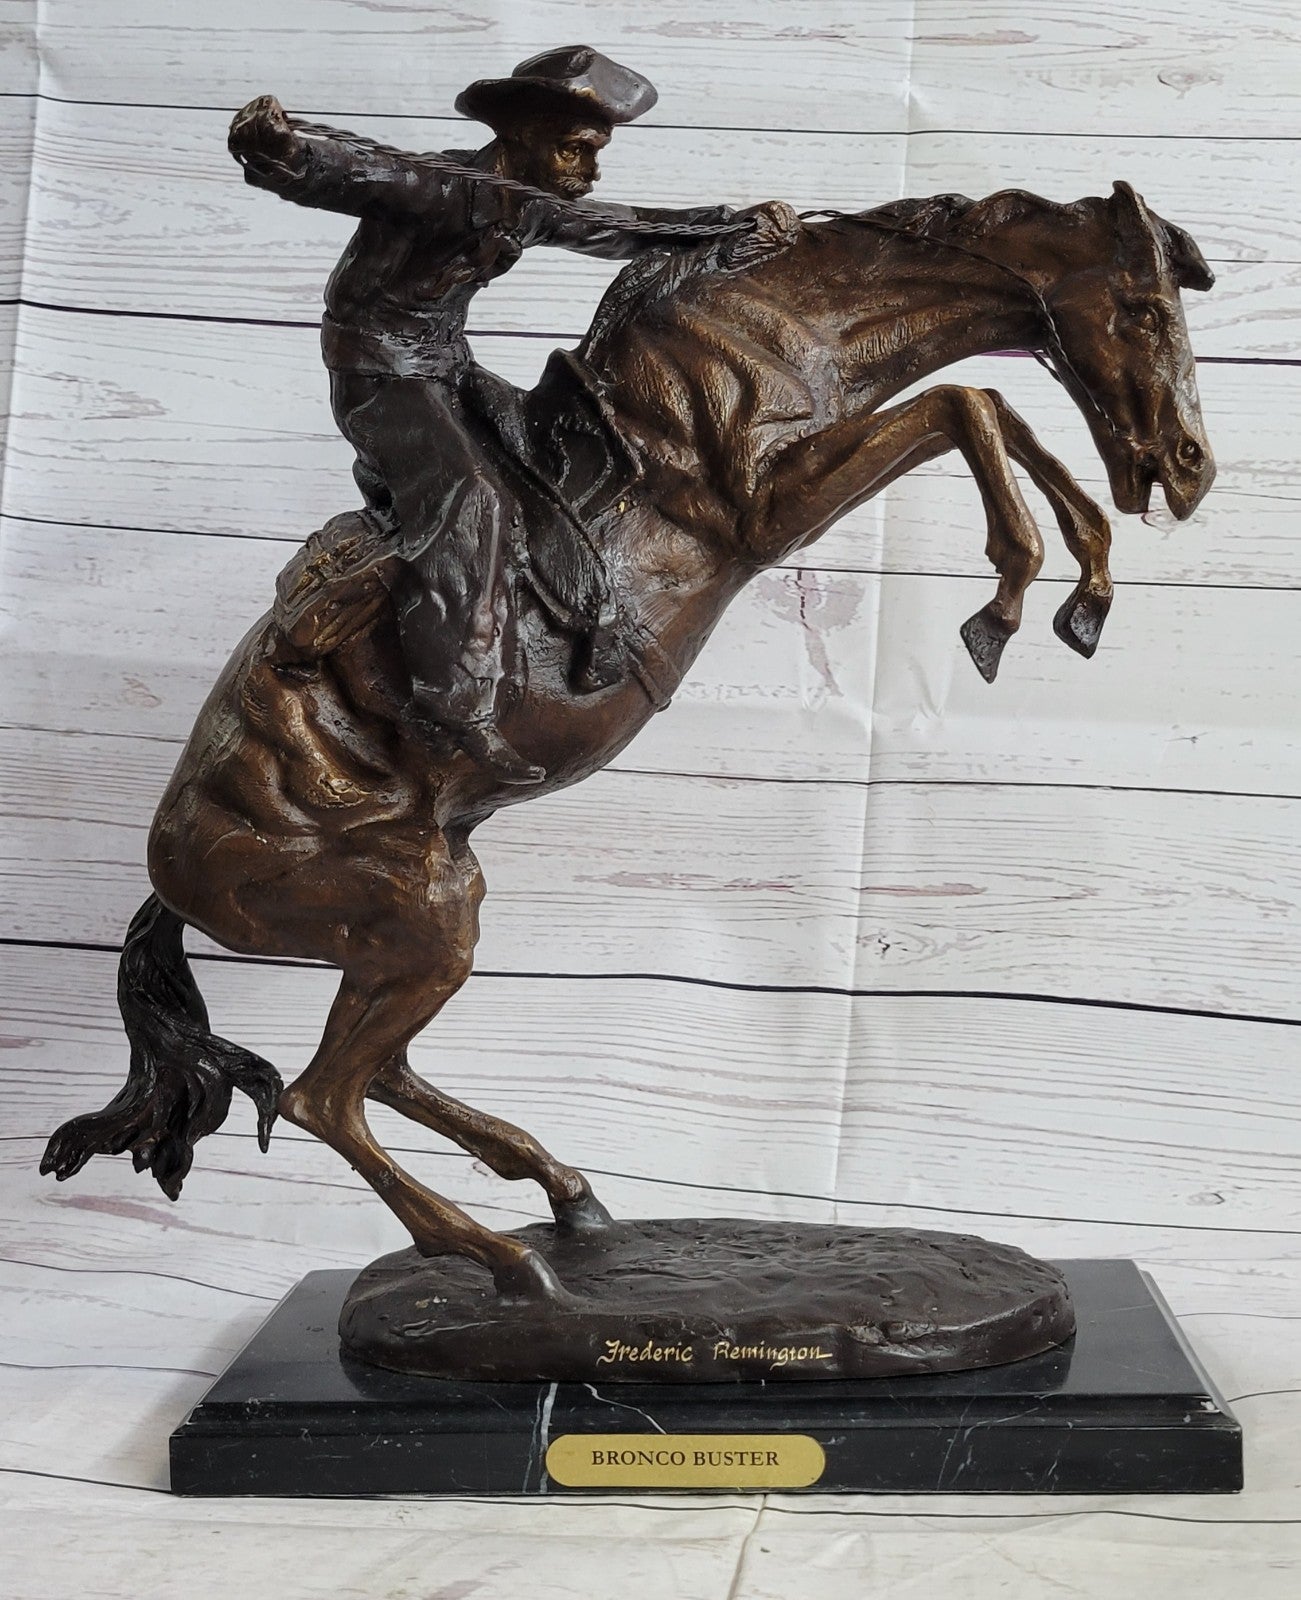 Bronco Buster Solid Bronze Collectible Sculpture Statue by F. Remington 18" Sale